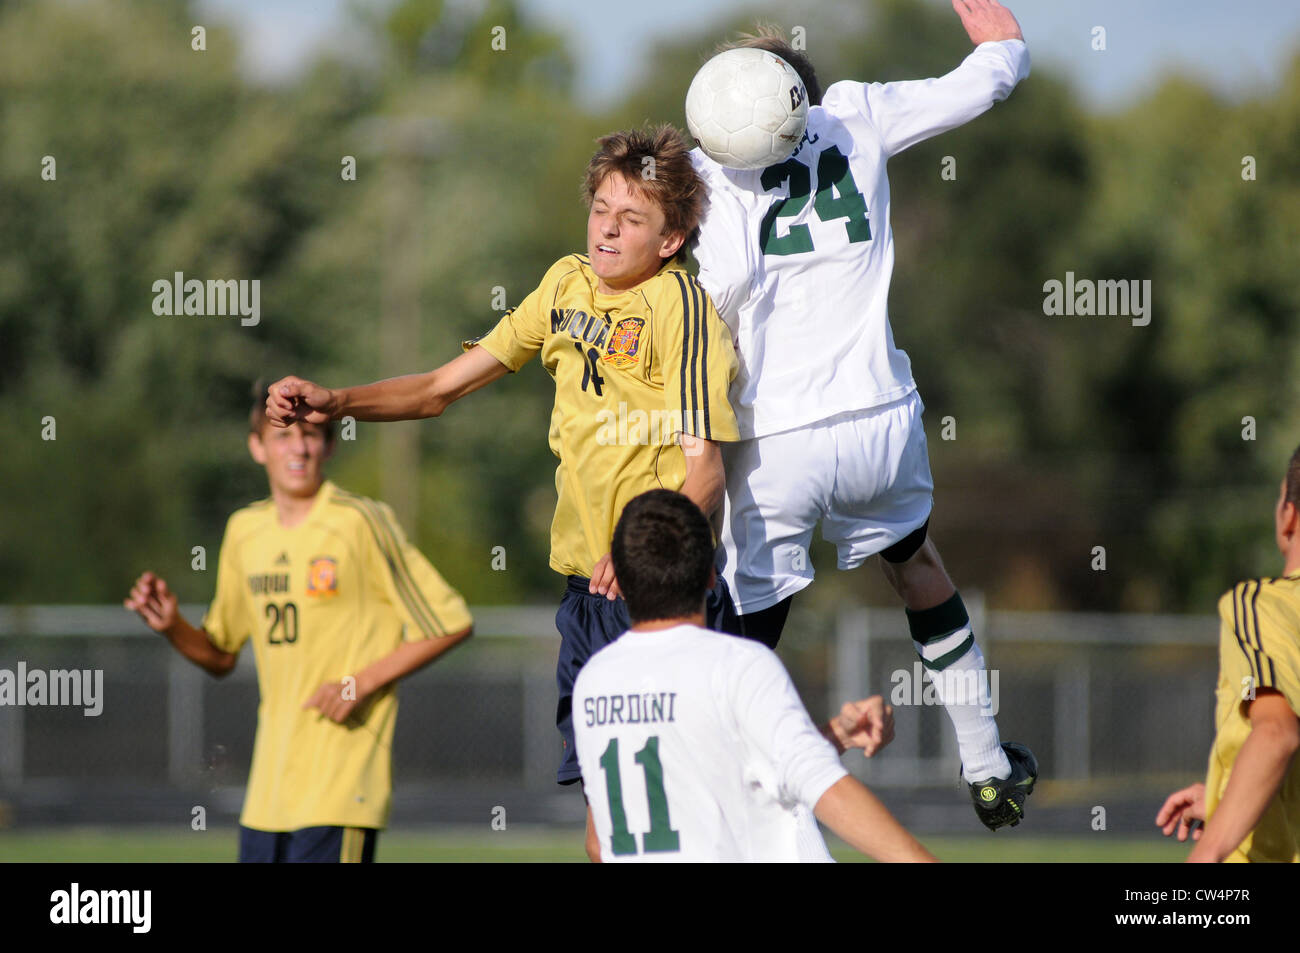 Soccer Players use a header to redirect the flight of the ball during a high school match. Stock Photo